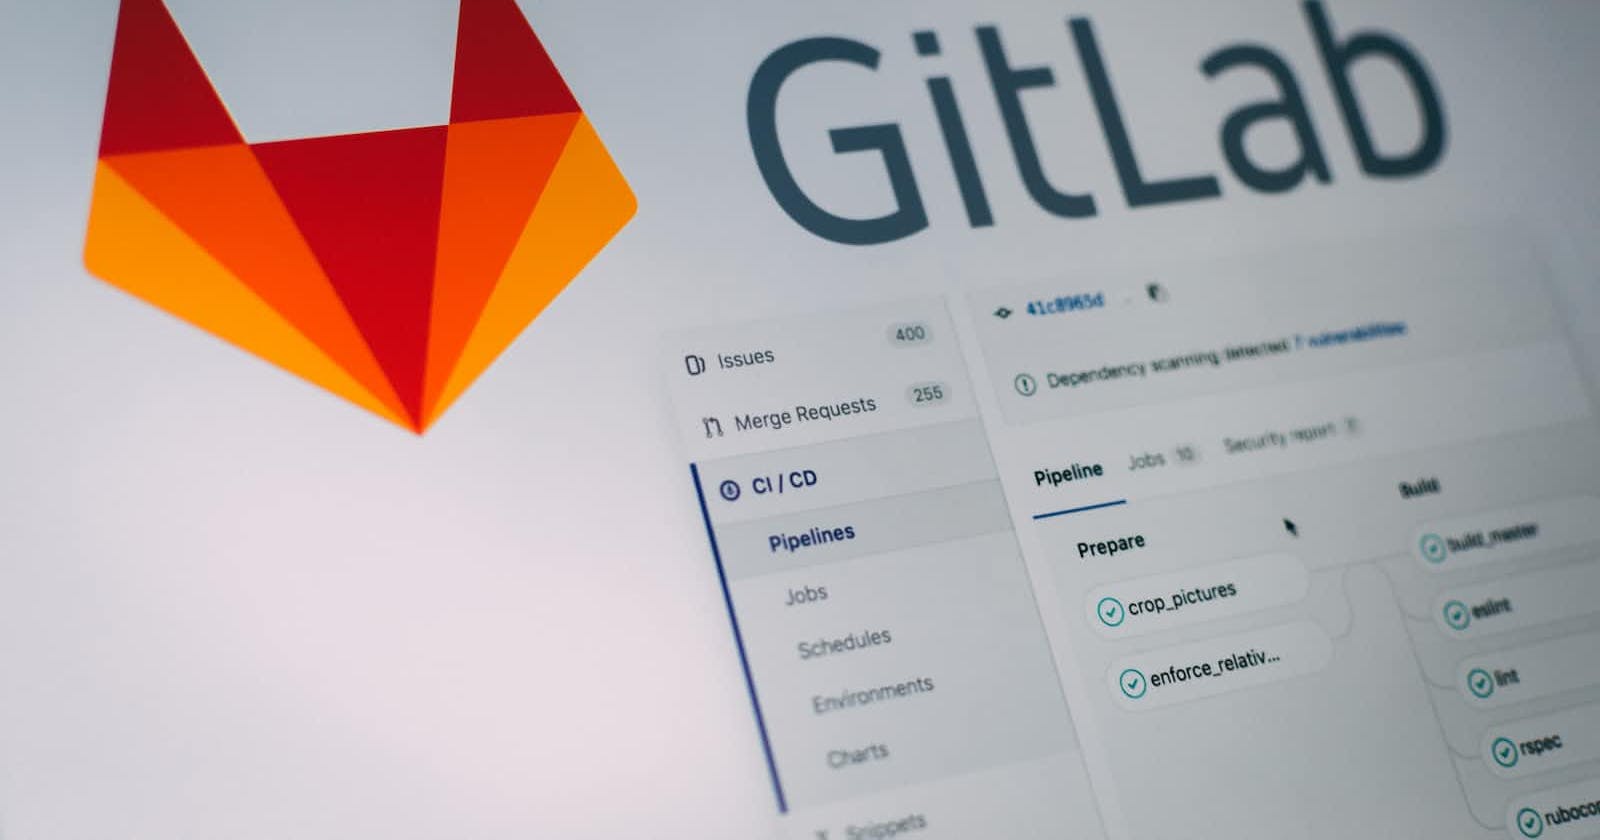 How to Upload Files to Git hub